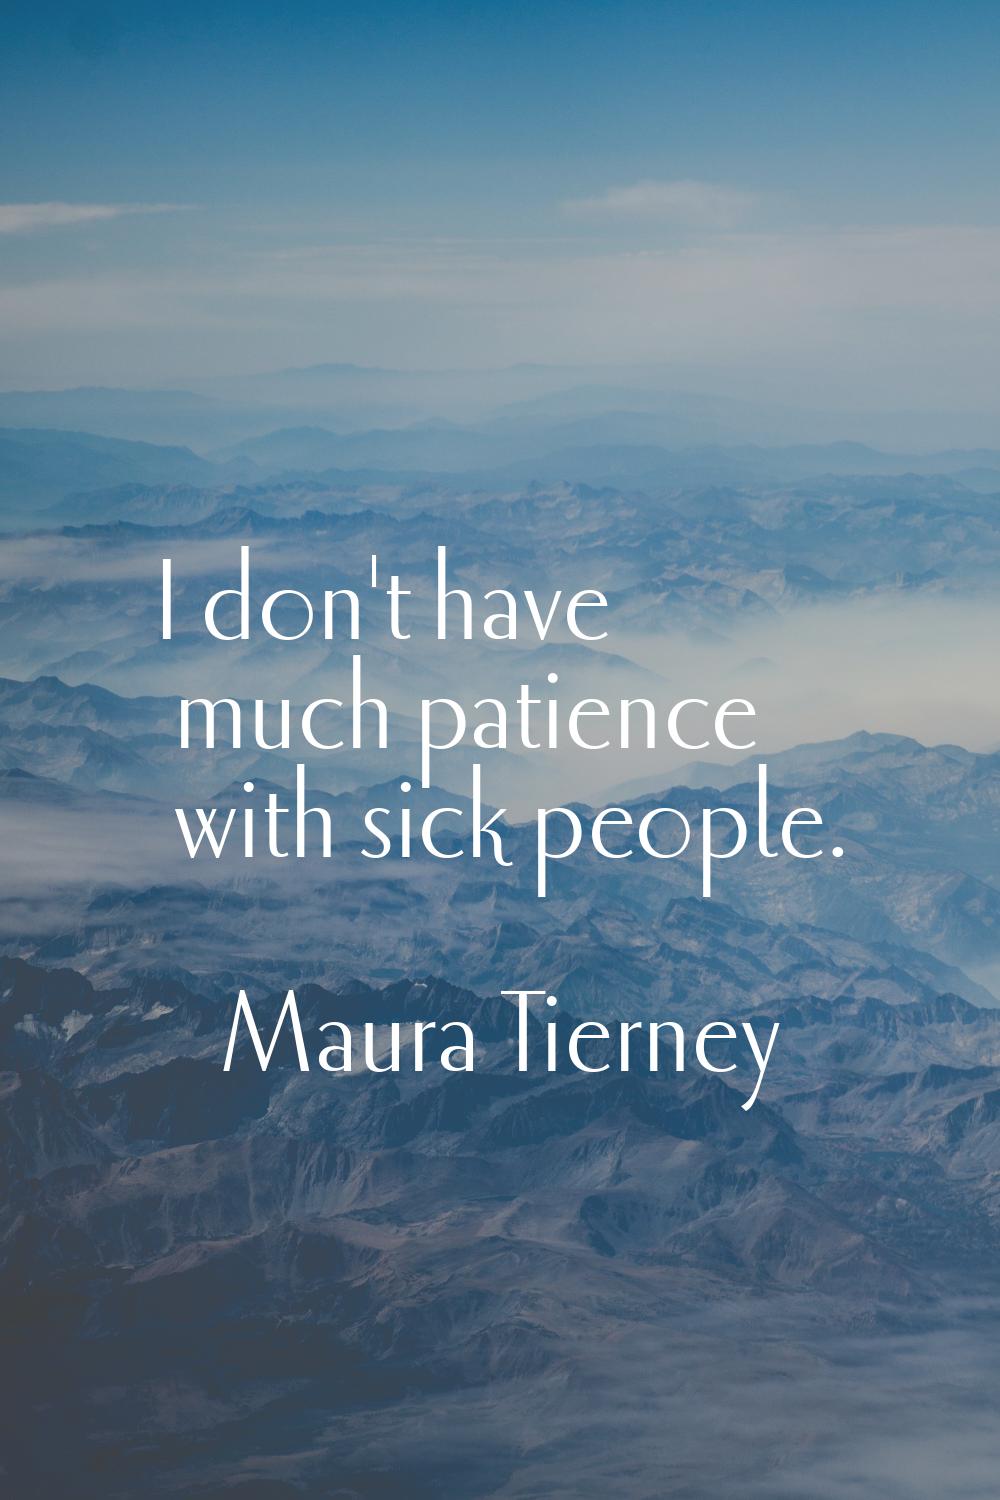 I don't have much patience with sick people.